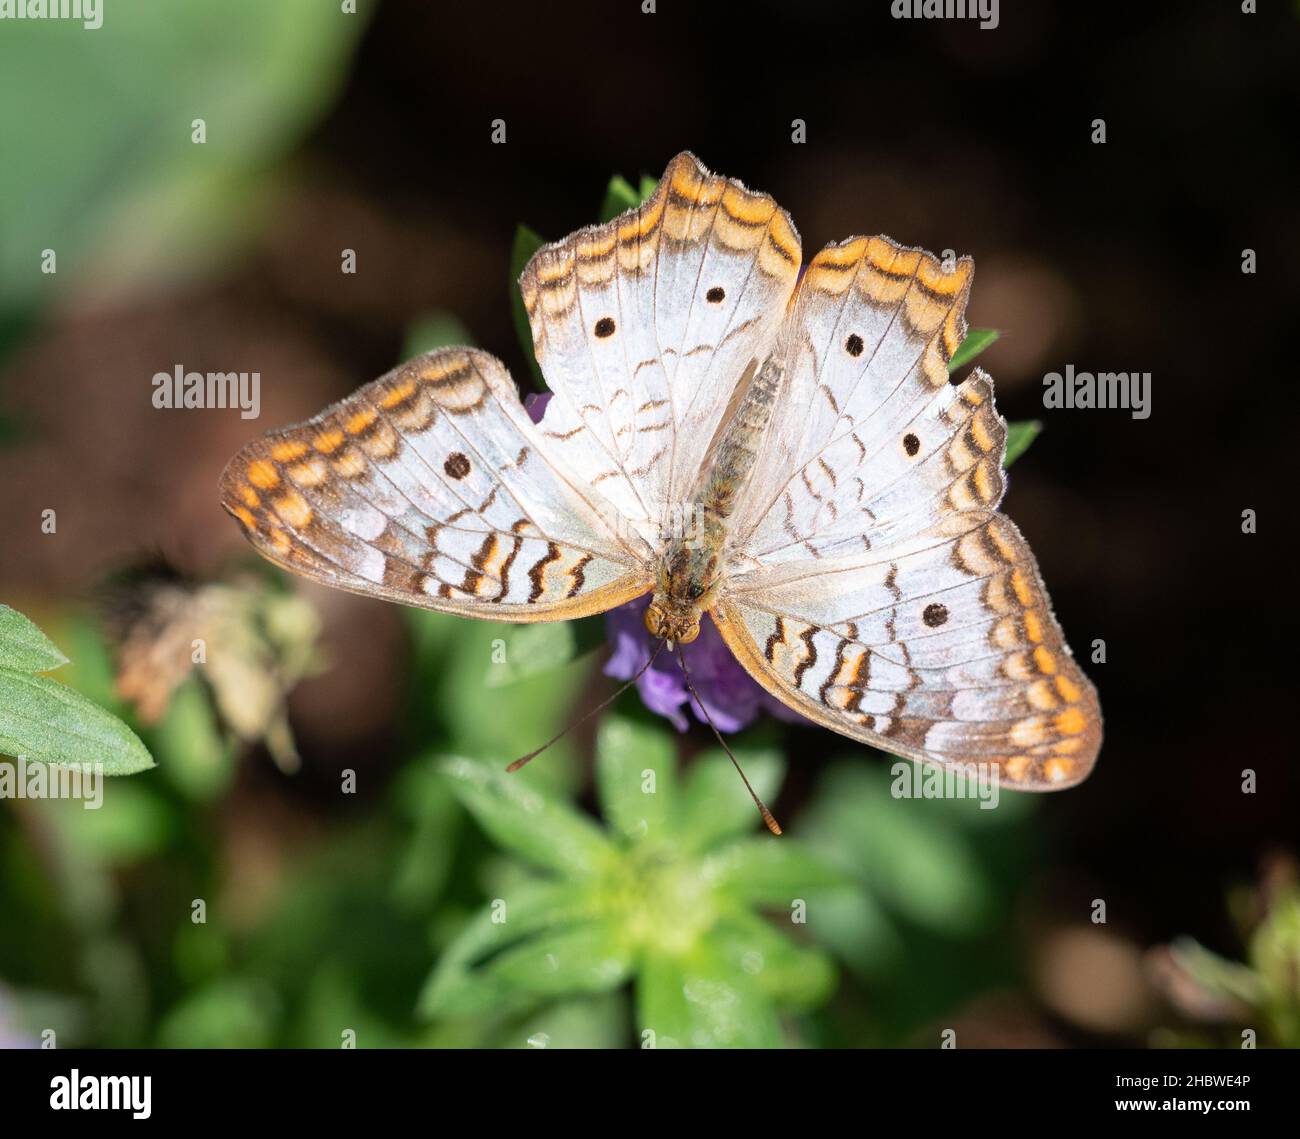 Off white or light gray butterfly with black spots and brown and orange markings on edges of wings. Butterfly is resting on a purple flower and photog Stock Photo